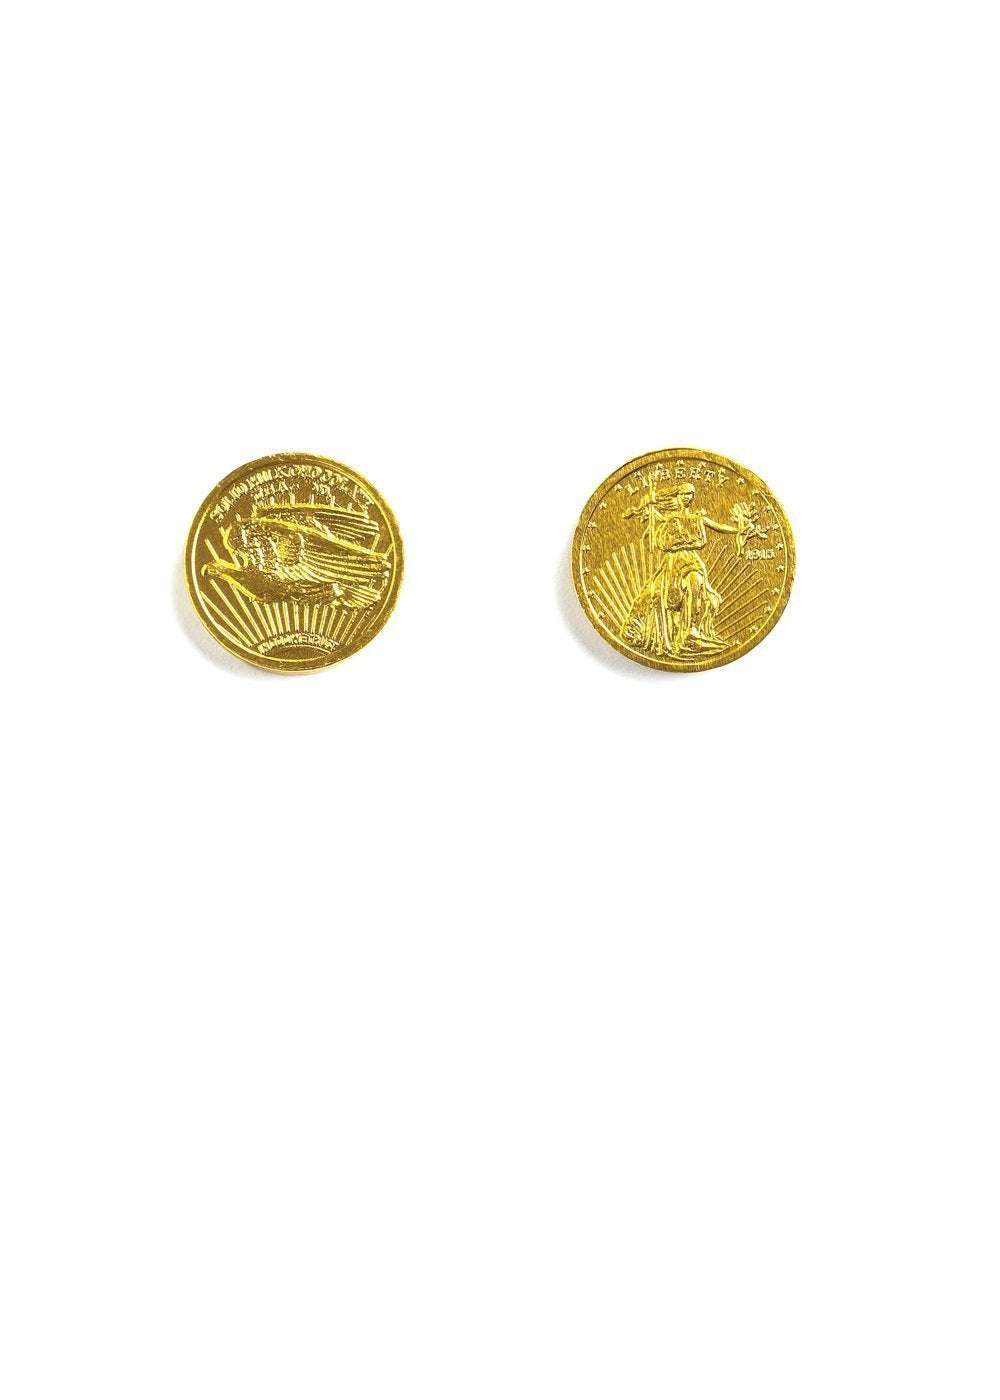 Chocolate Gold Coins Individual